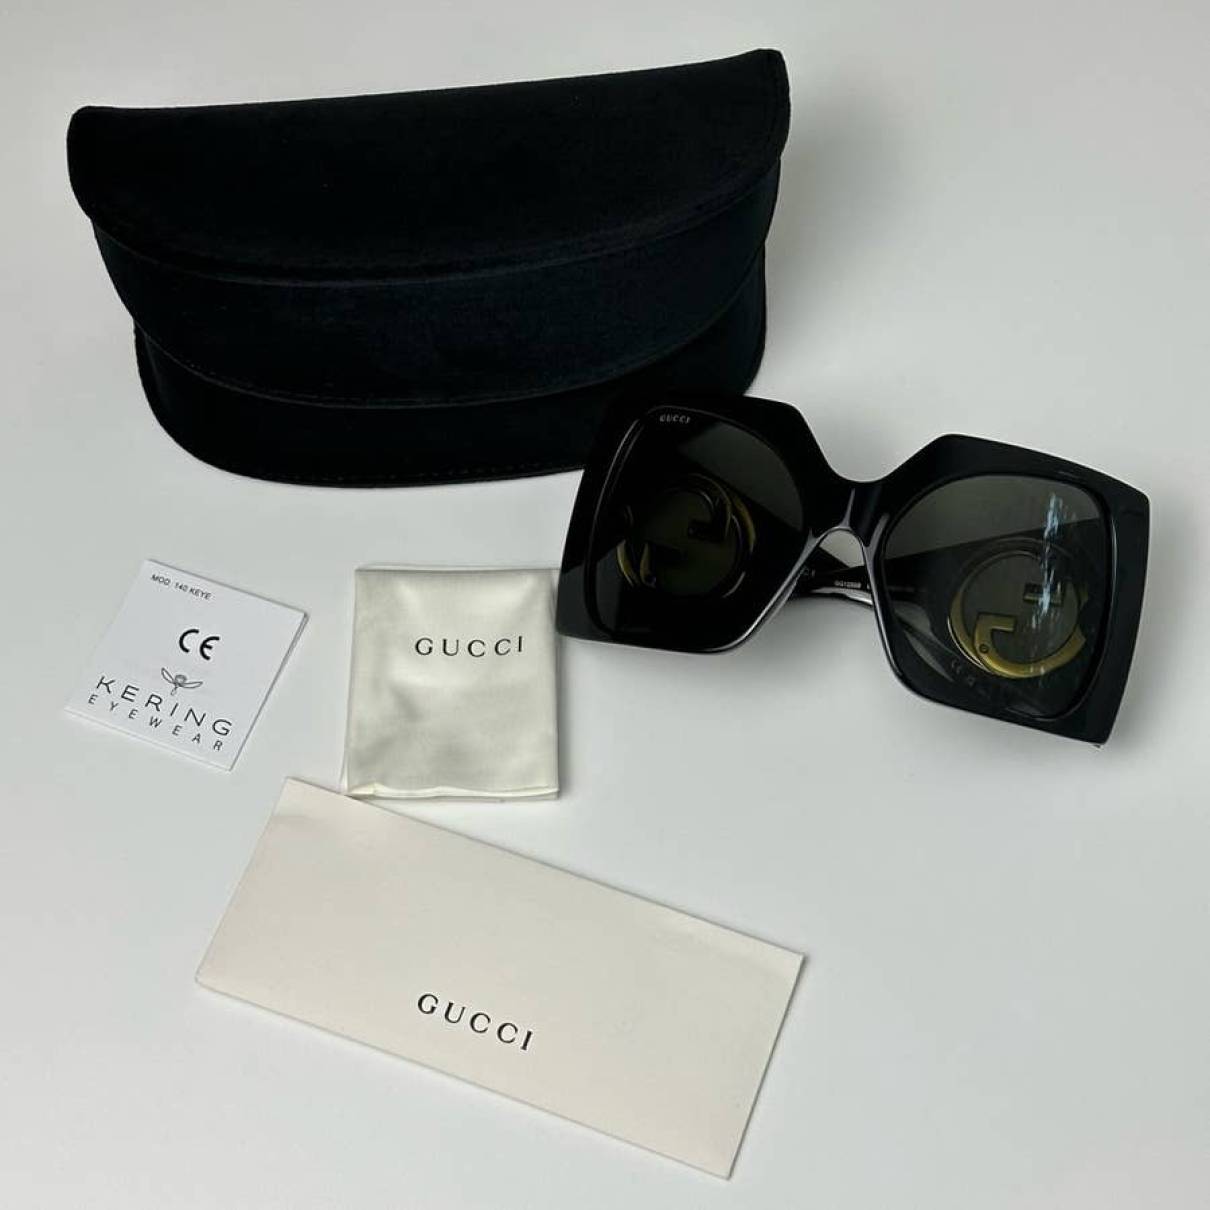 Gucci - Authenticated Sunglasses - Black Plain for Women, Never Worn, with Tag